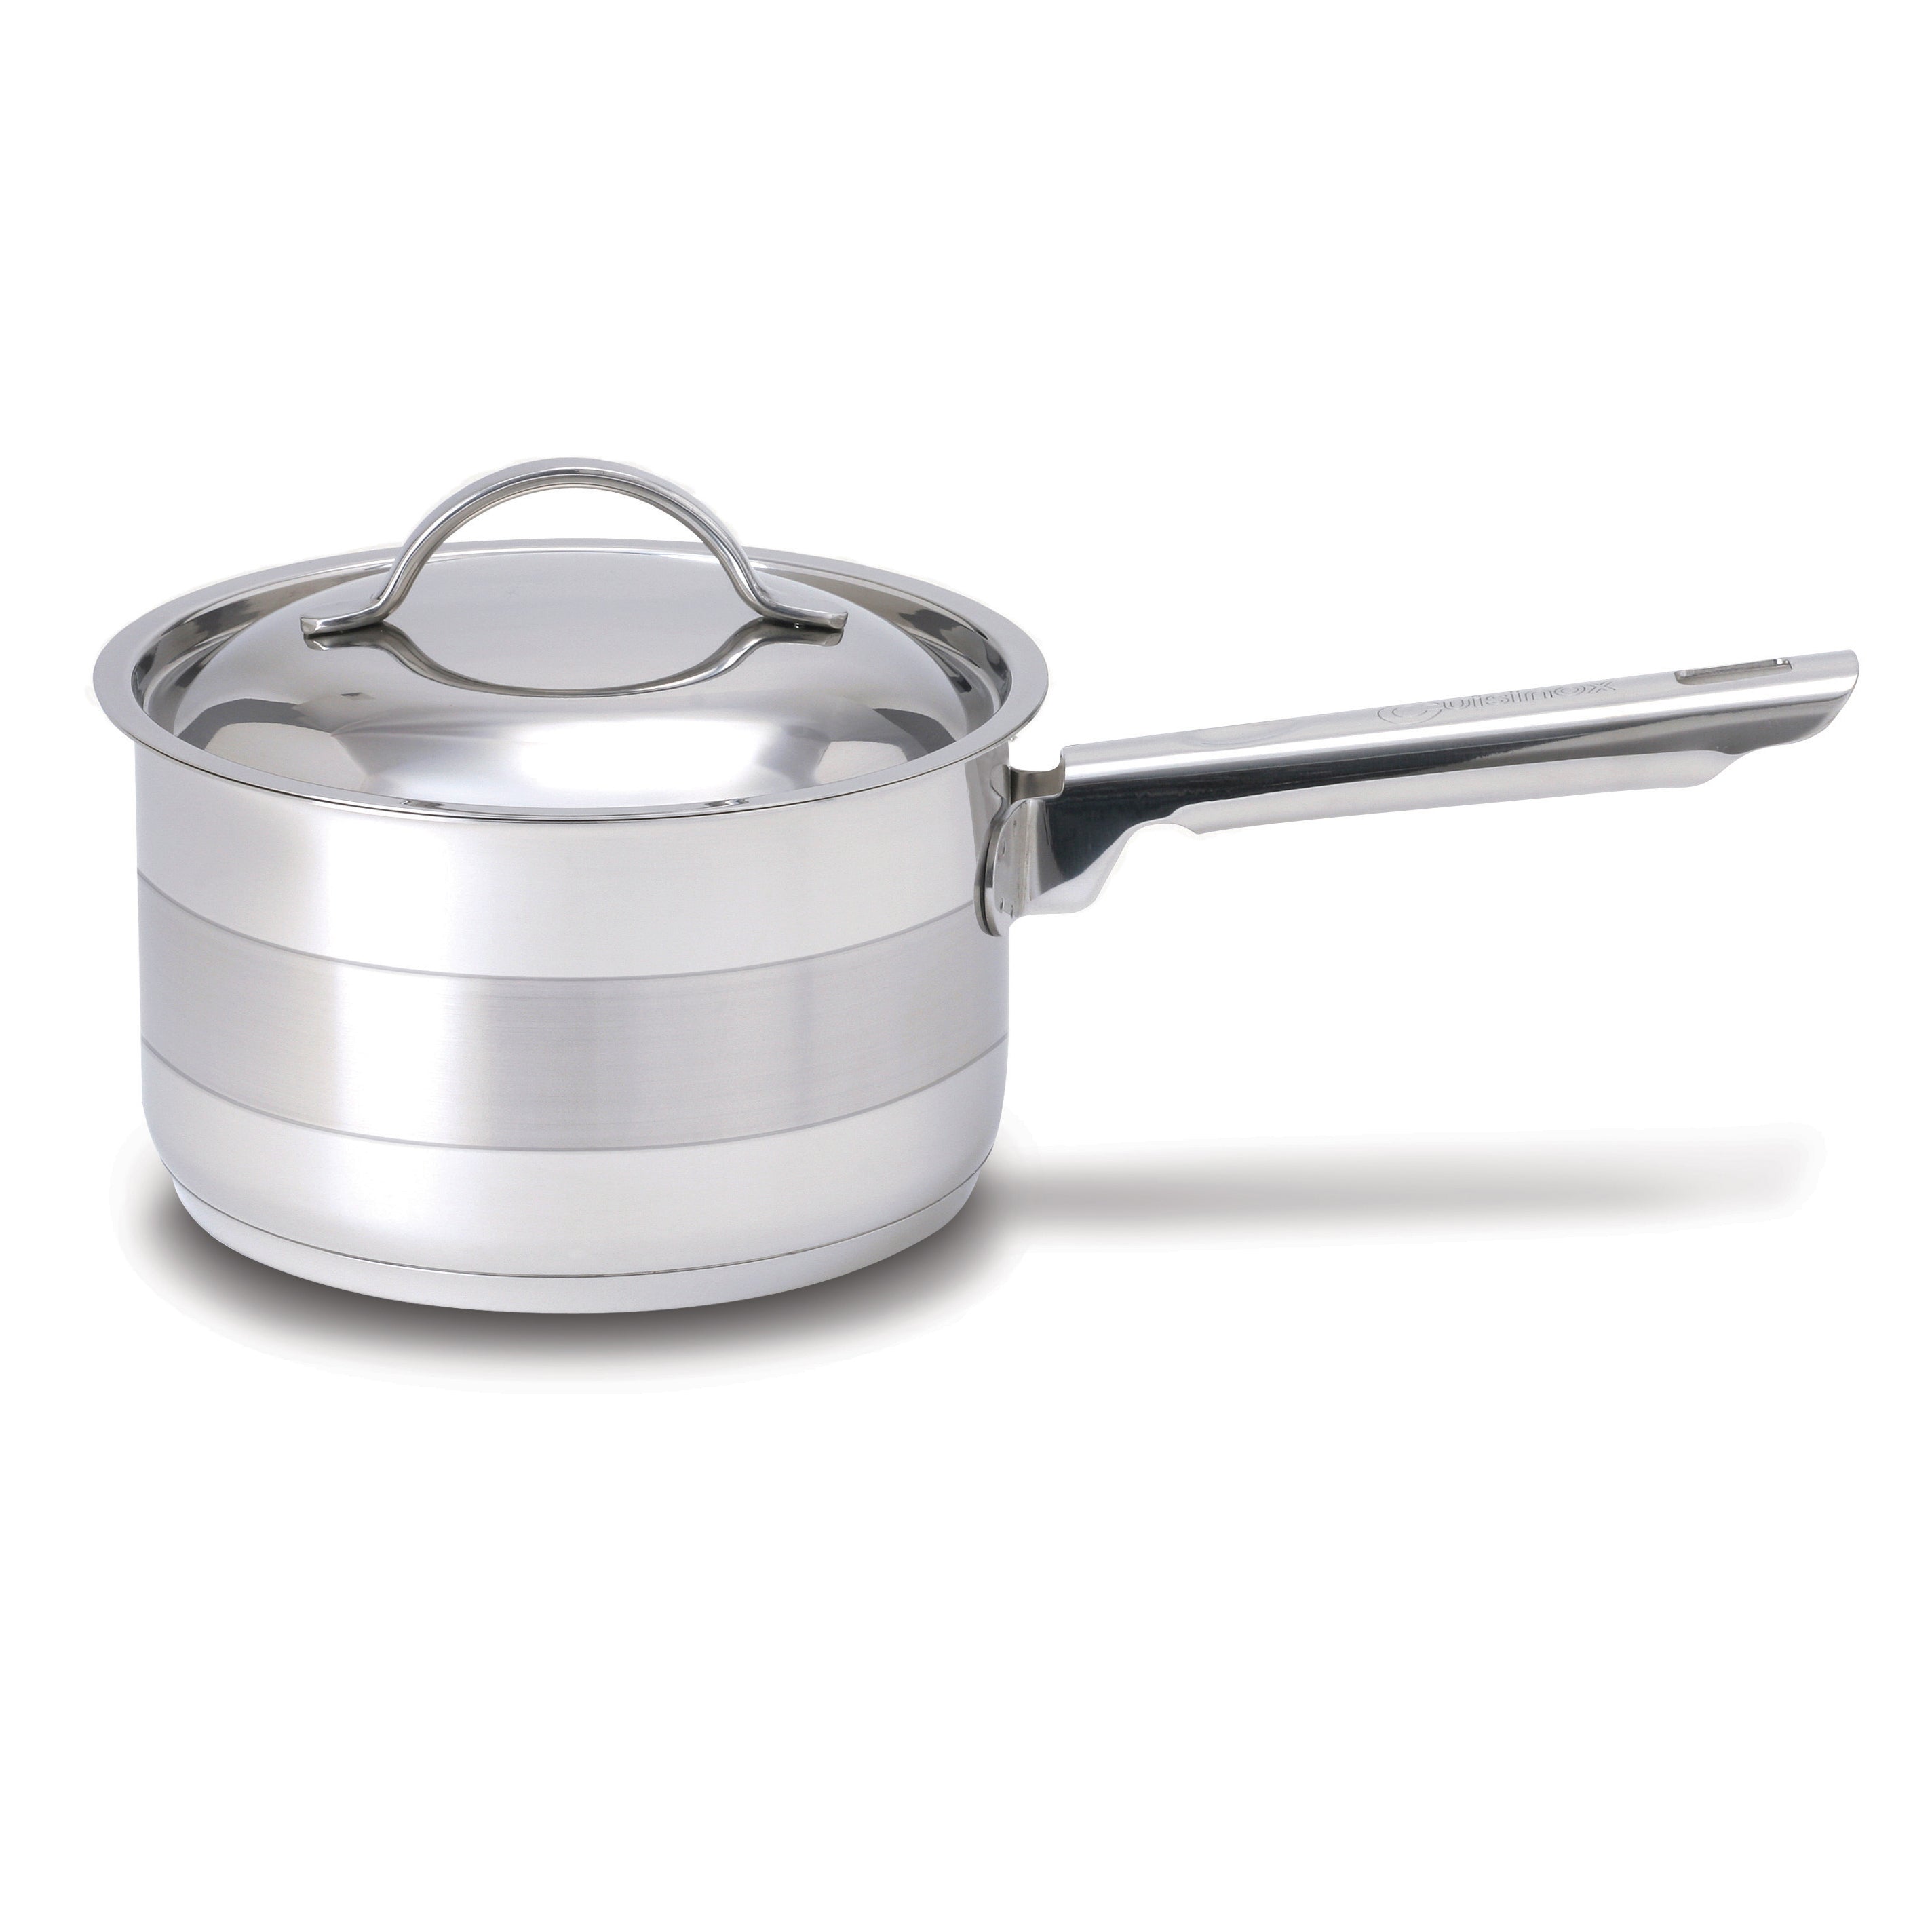 Cuisinox Gourmet 2 quart Spouted Saucepan with Lid